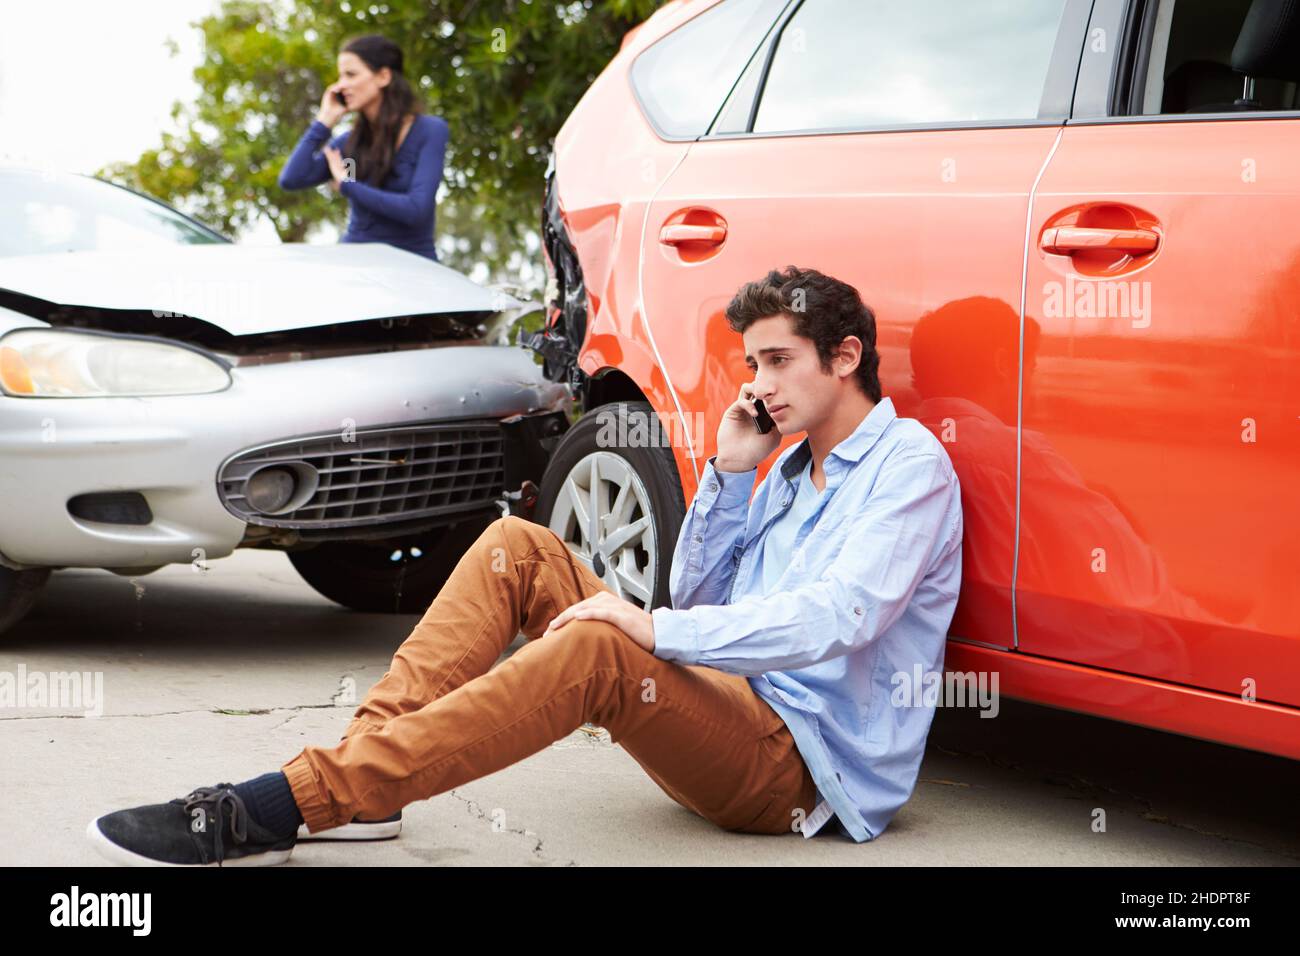 on the phone, accident, rear end collision, on the phones, accidents, rear end collisions Stock Photo